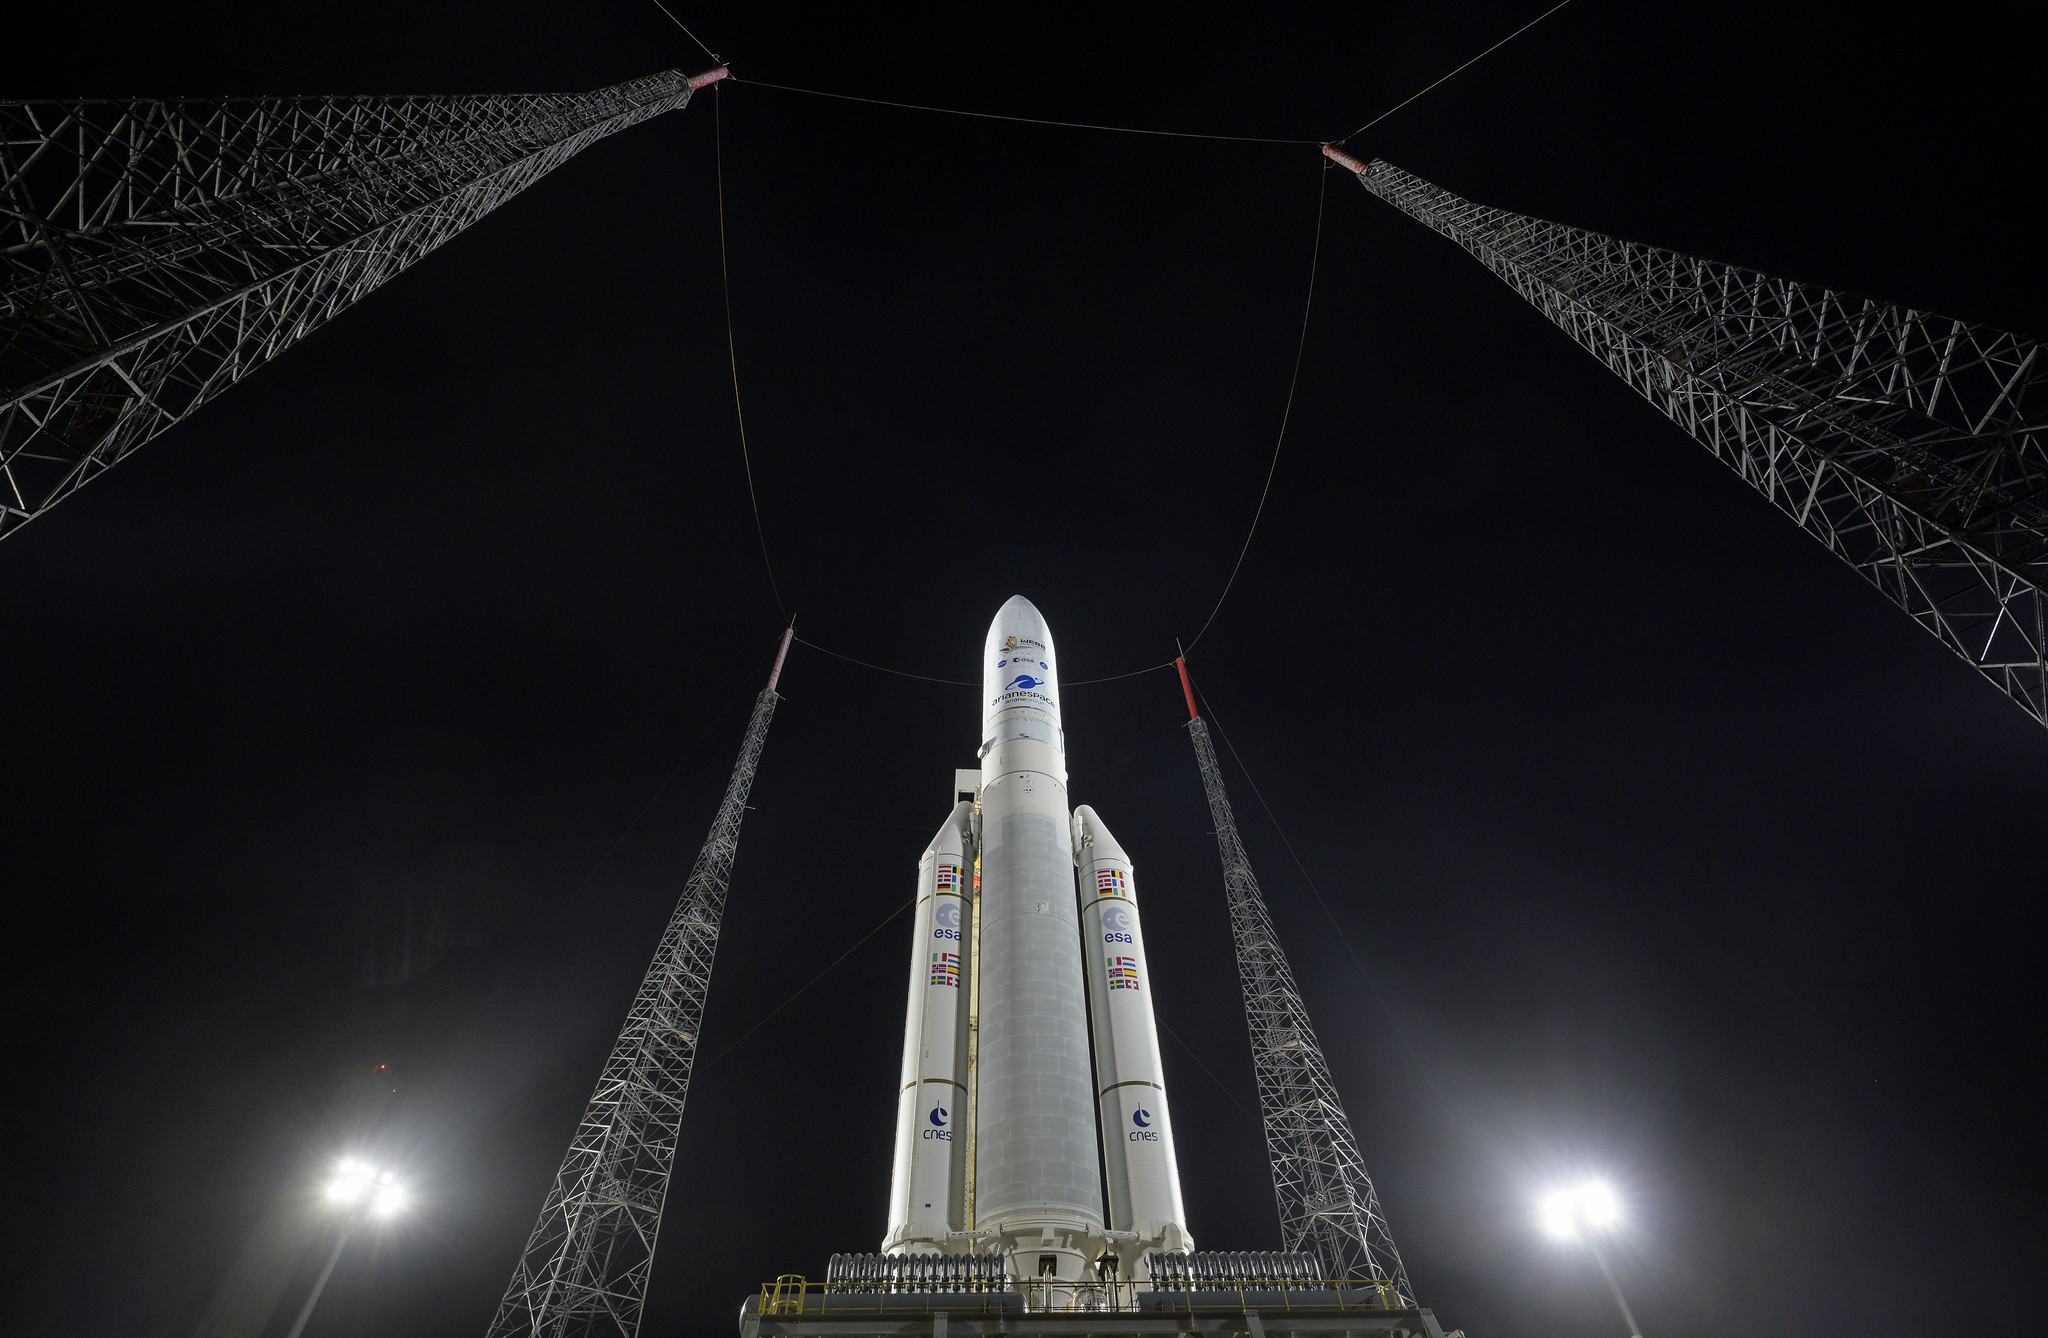 The Ariane 5 rocket carrying the James Webb Space Telescope as seen on the launch pad in Kourou, French Guiana, the evening of Dec. 24, 2021.